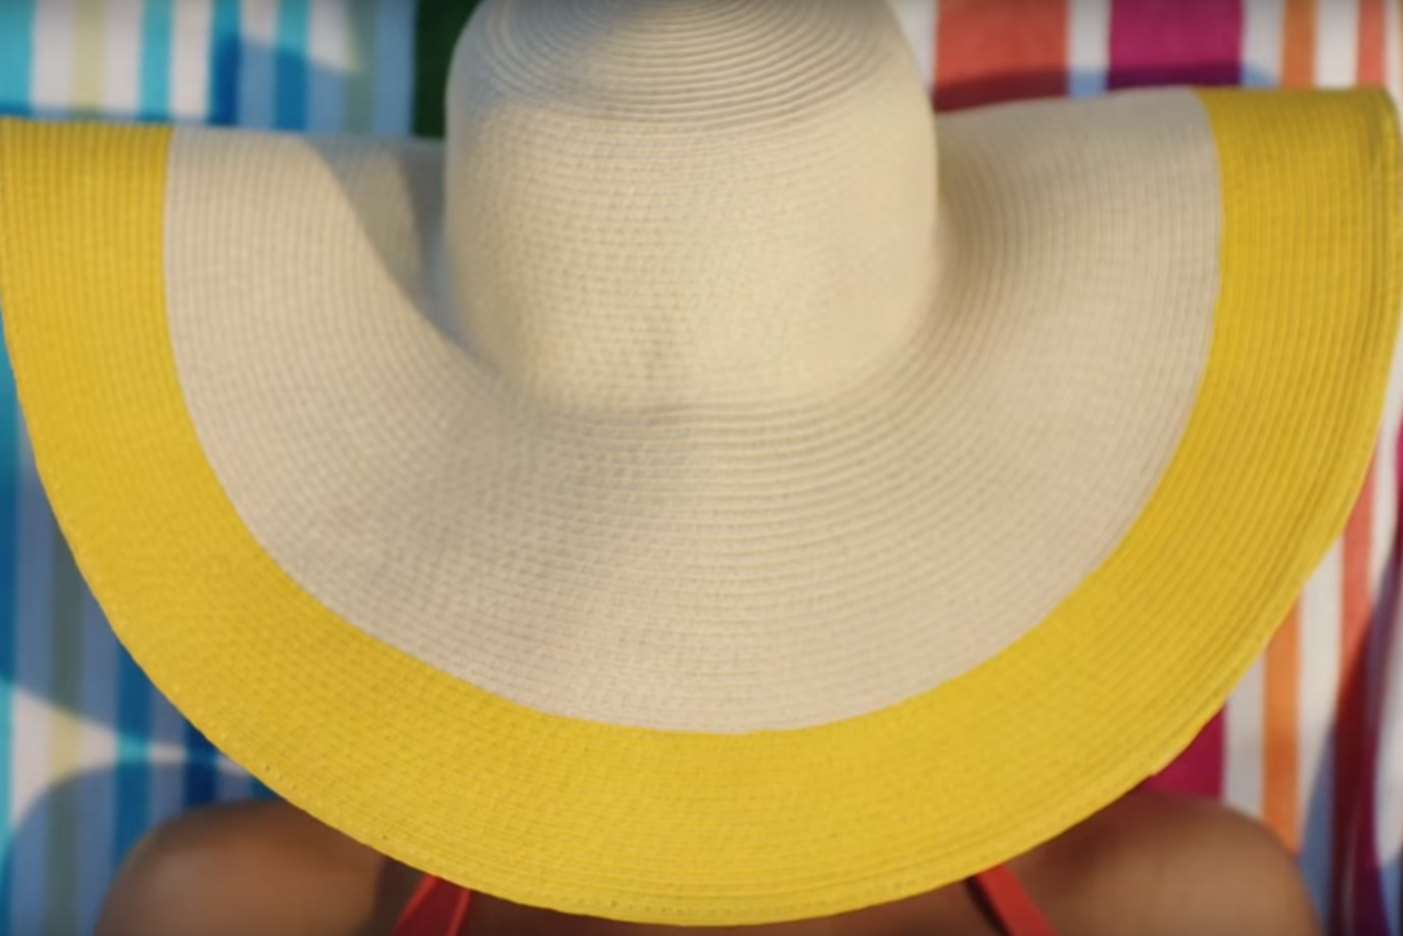 The 30-second ad shows a woman in a floppy sun hat